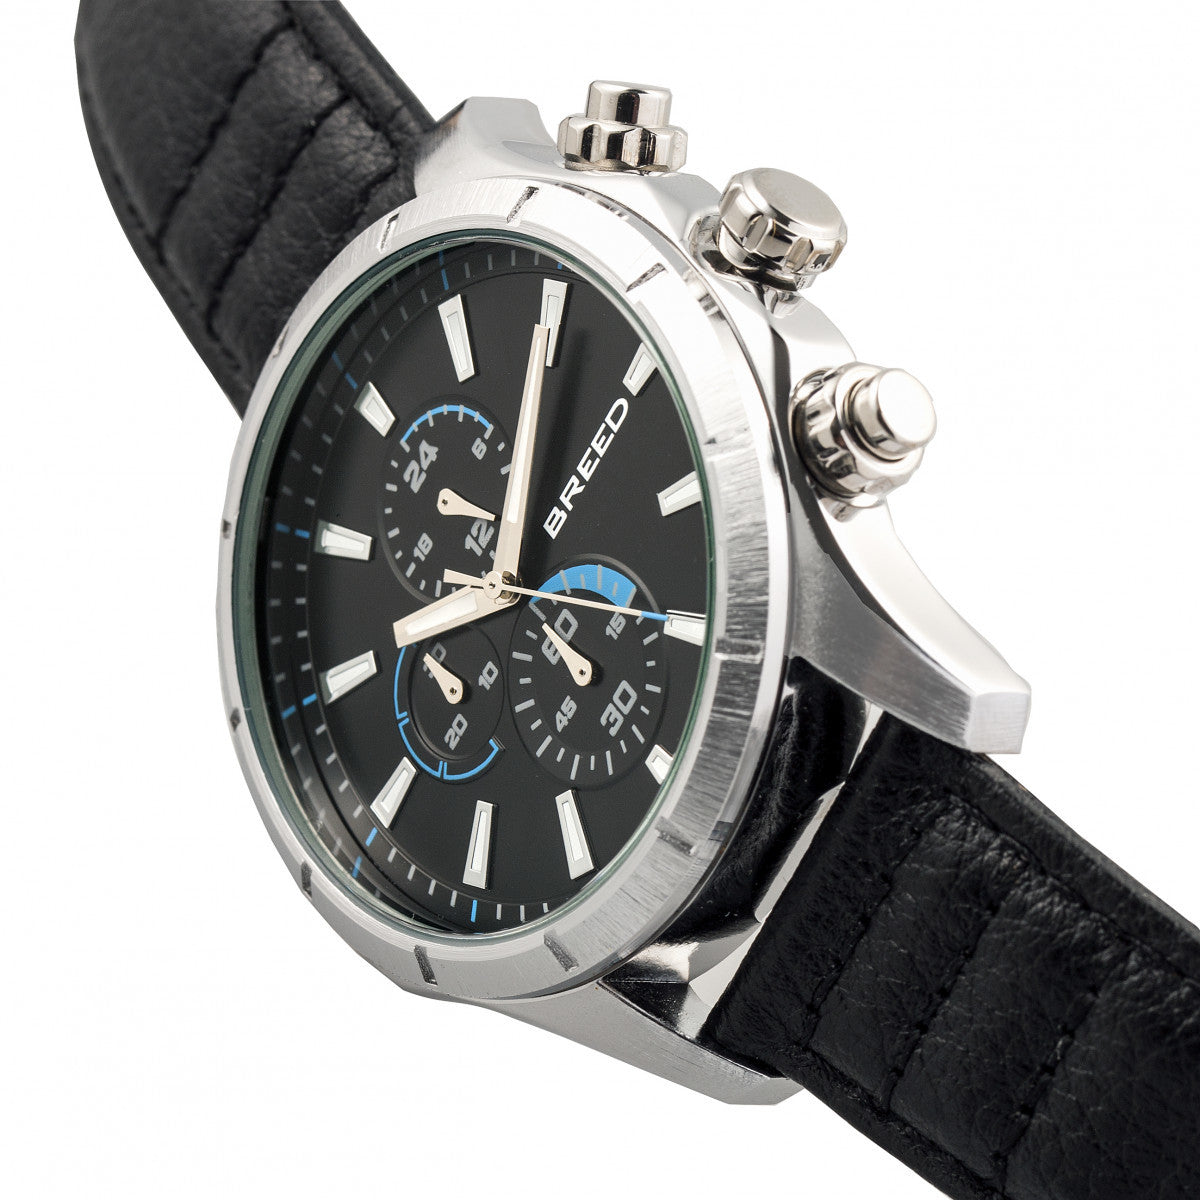 Breed Lacroix Chronograph Leather-Band Watch - Silver/Black - BRD6801